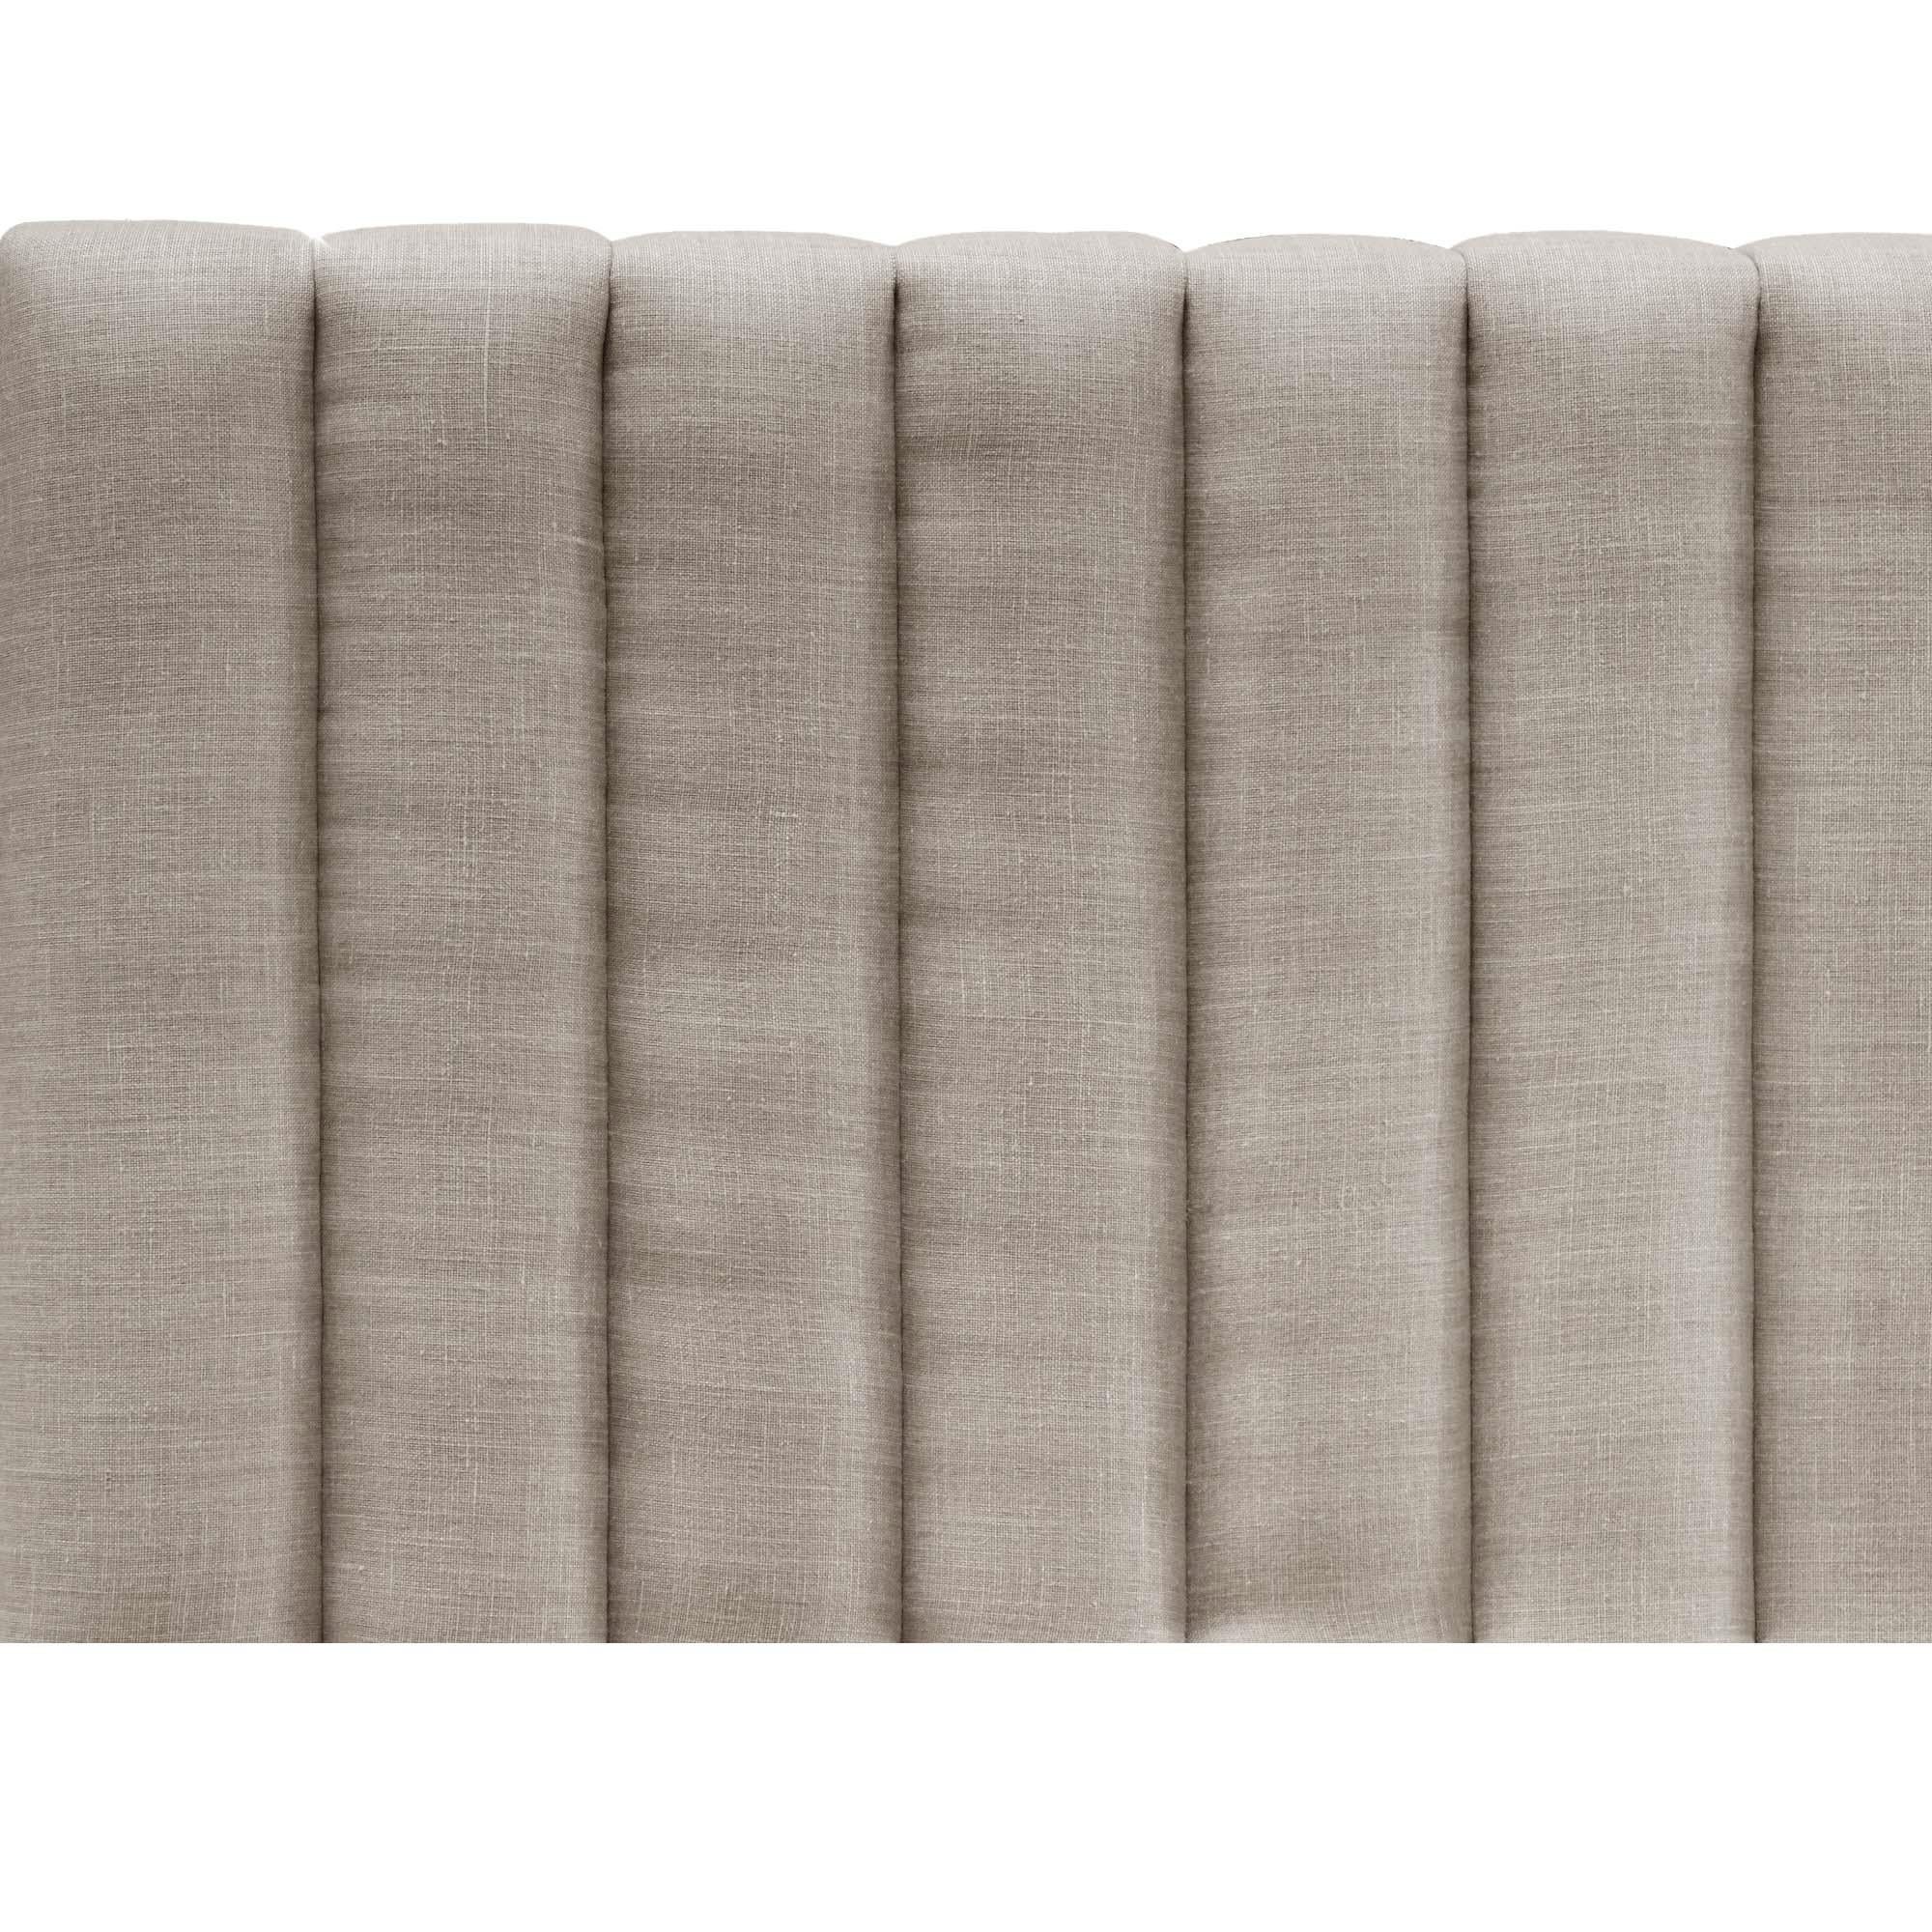 Mid-Century Modern Channel Tufted Linen Capitan Bed by Lawson-Fenning, Queen